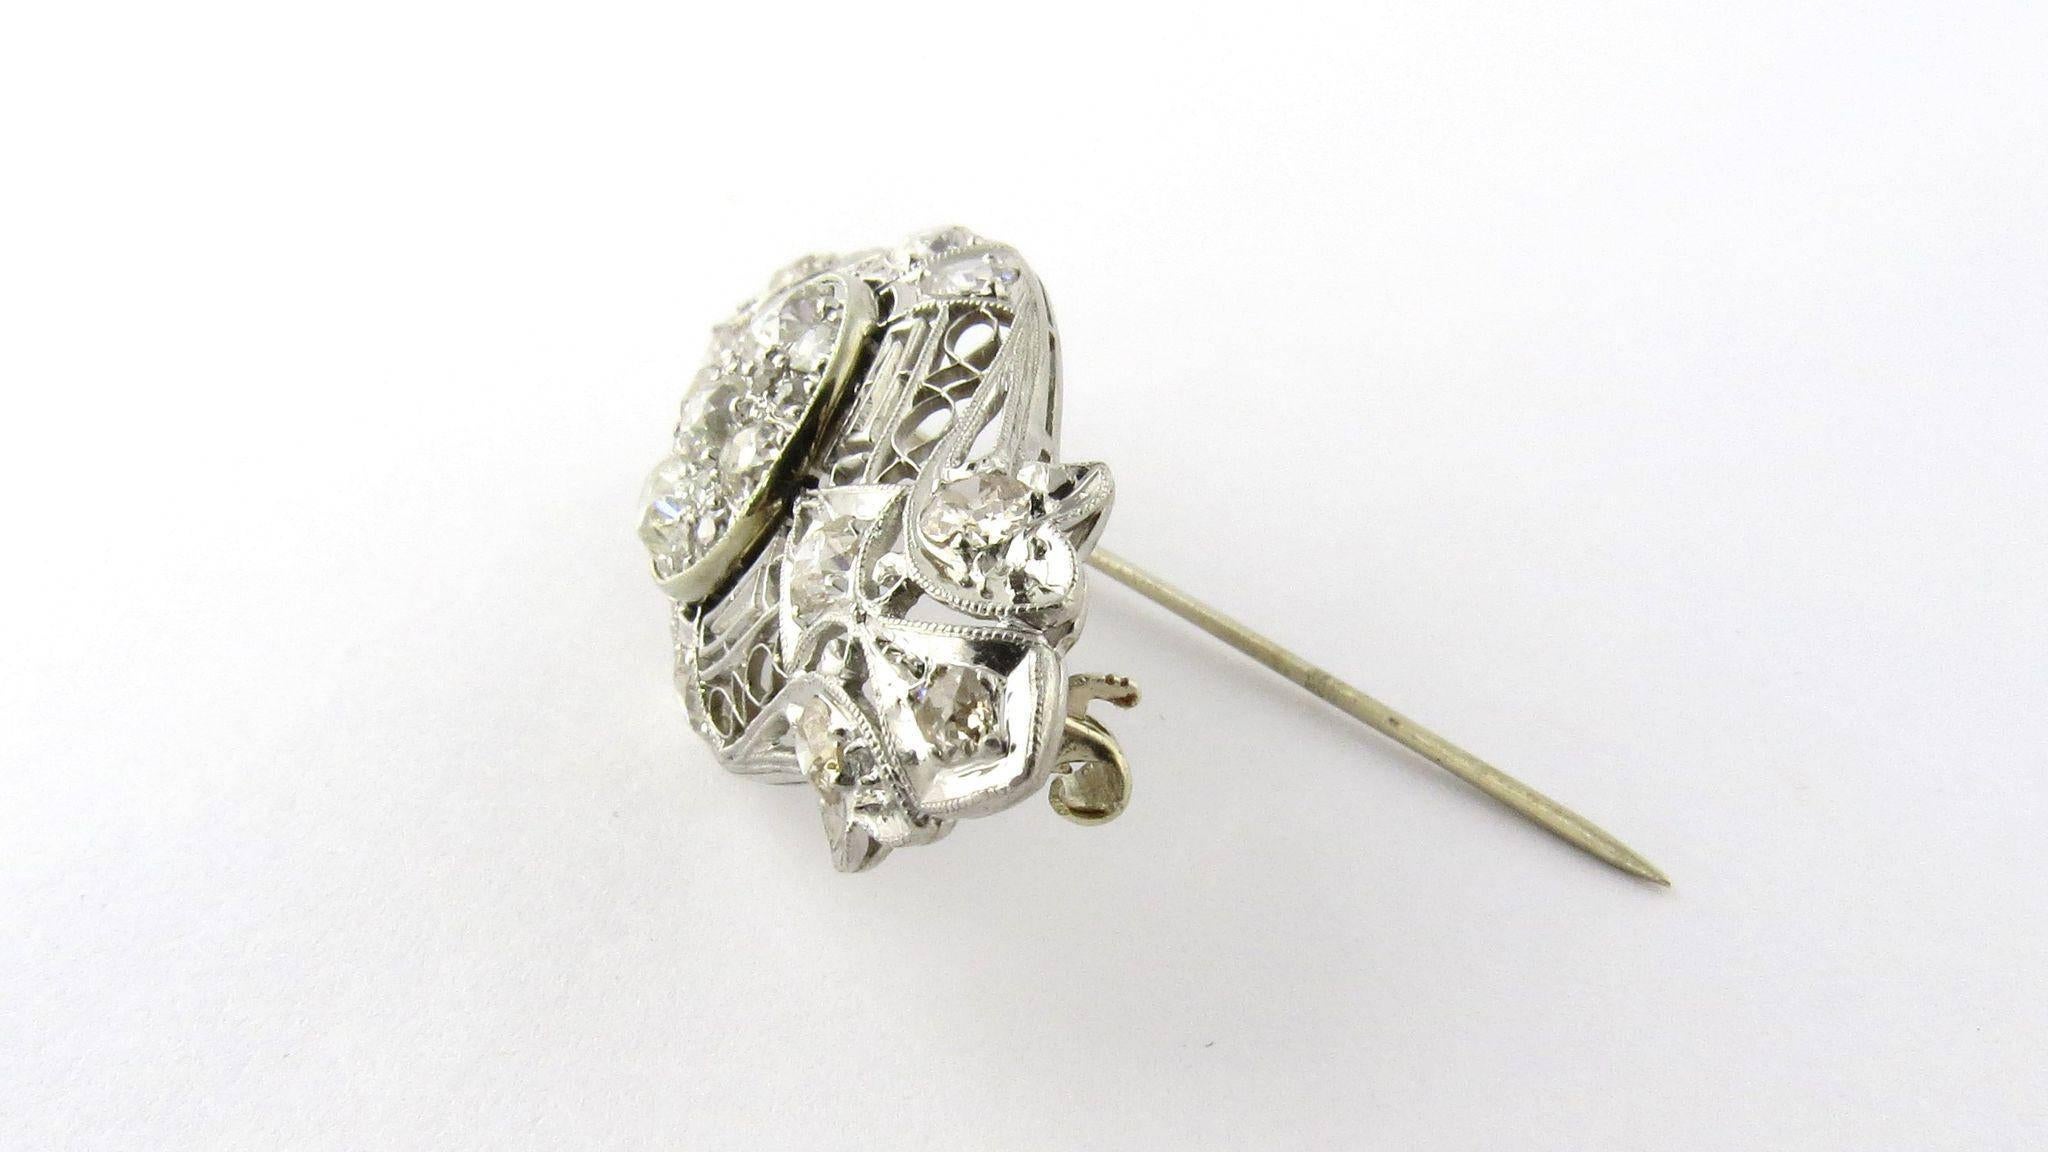 Antique Edwardian Era Platinum and 14K White Gold Diamond Brooch Pin. 

Stunning example of Edwardian Era beauty, this brooch boasts of 3.25 total carat weight in diamonds. 

Circa 1900. 

Pin and clasp are marked 14K and brooch has been tested as